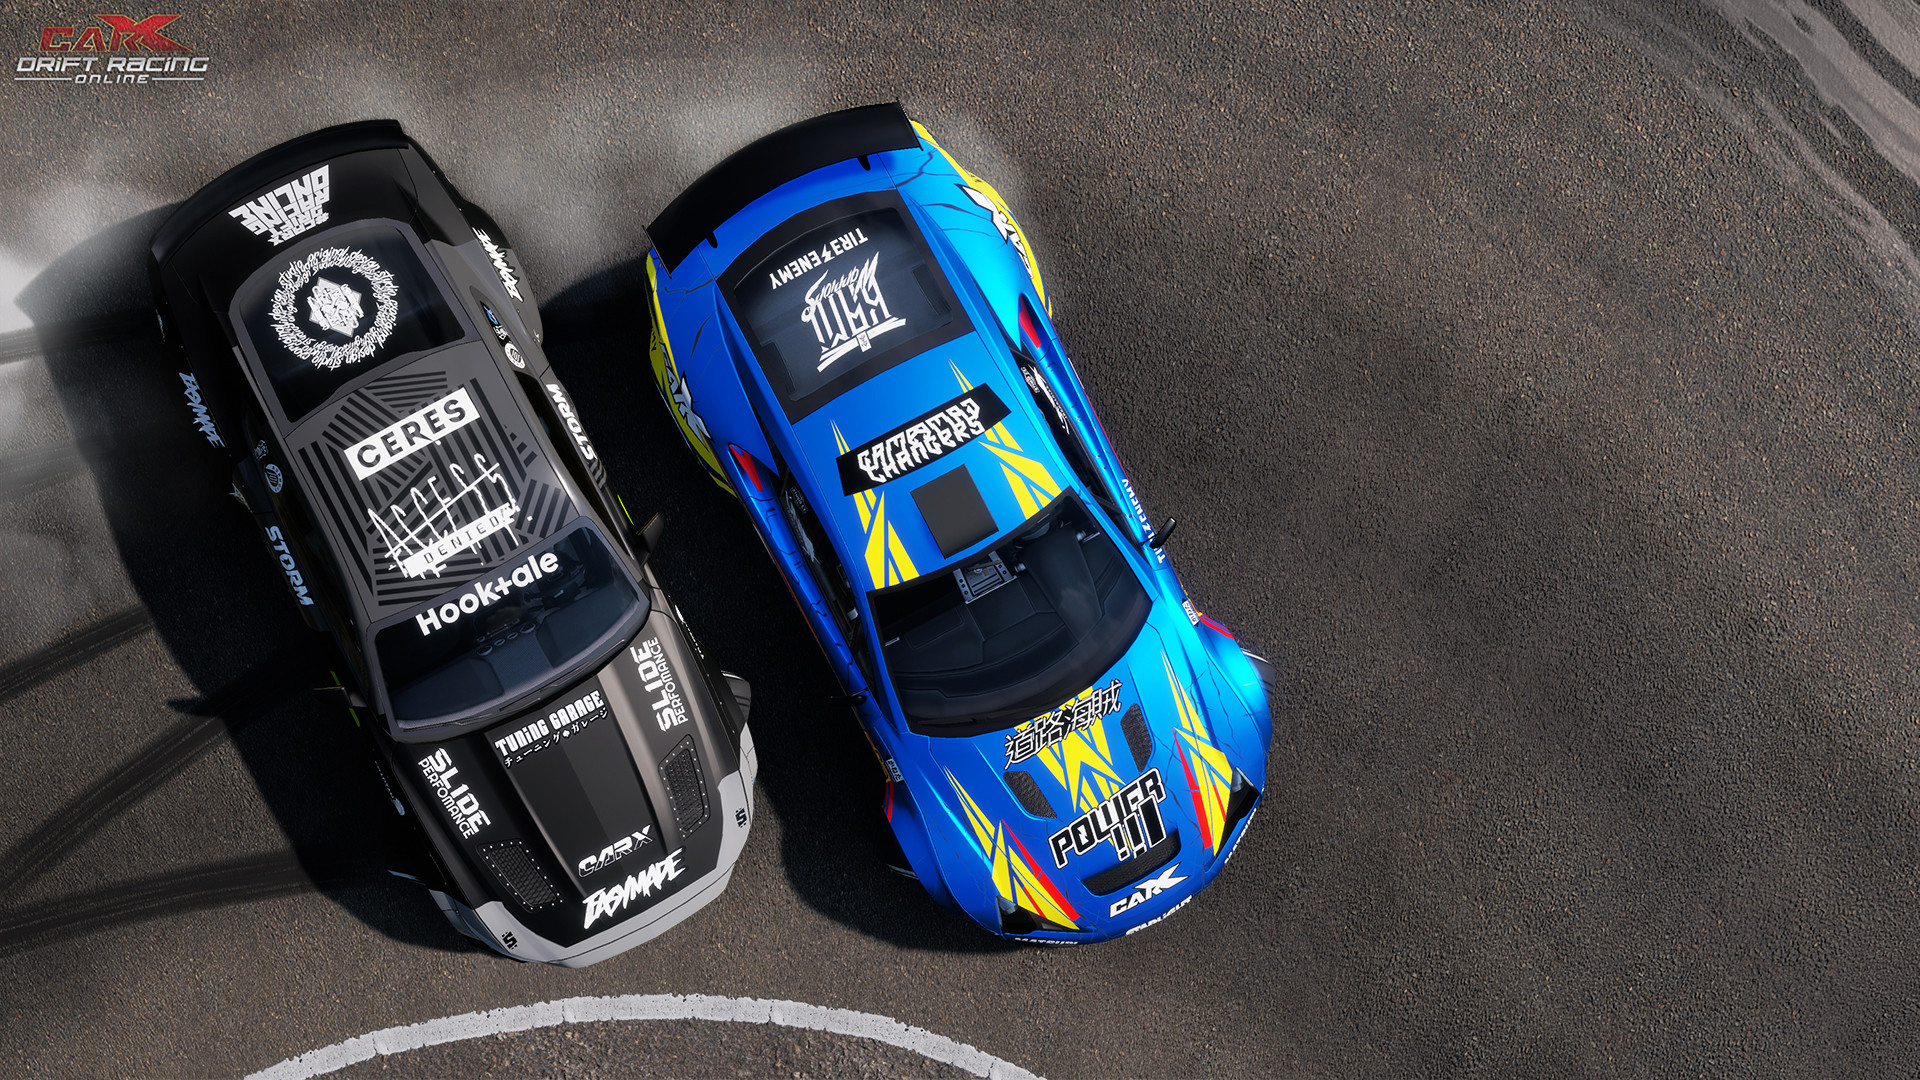 CarX Technologies on X: What's up drivers!💥💥💥 CarX Drift Racing Online  2.18.0 update is available now for Steam players!🔥 ✓ New cars, livery  sharing, quest system, updated locations, new XDS configurations and